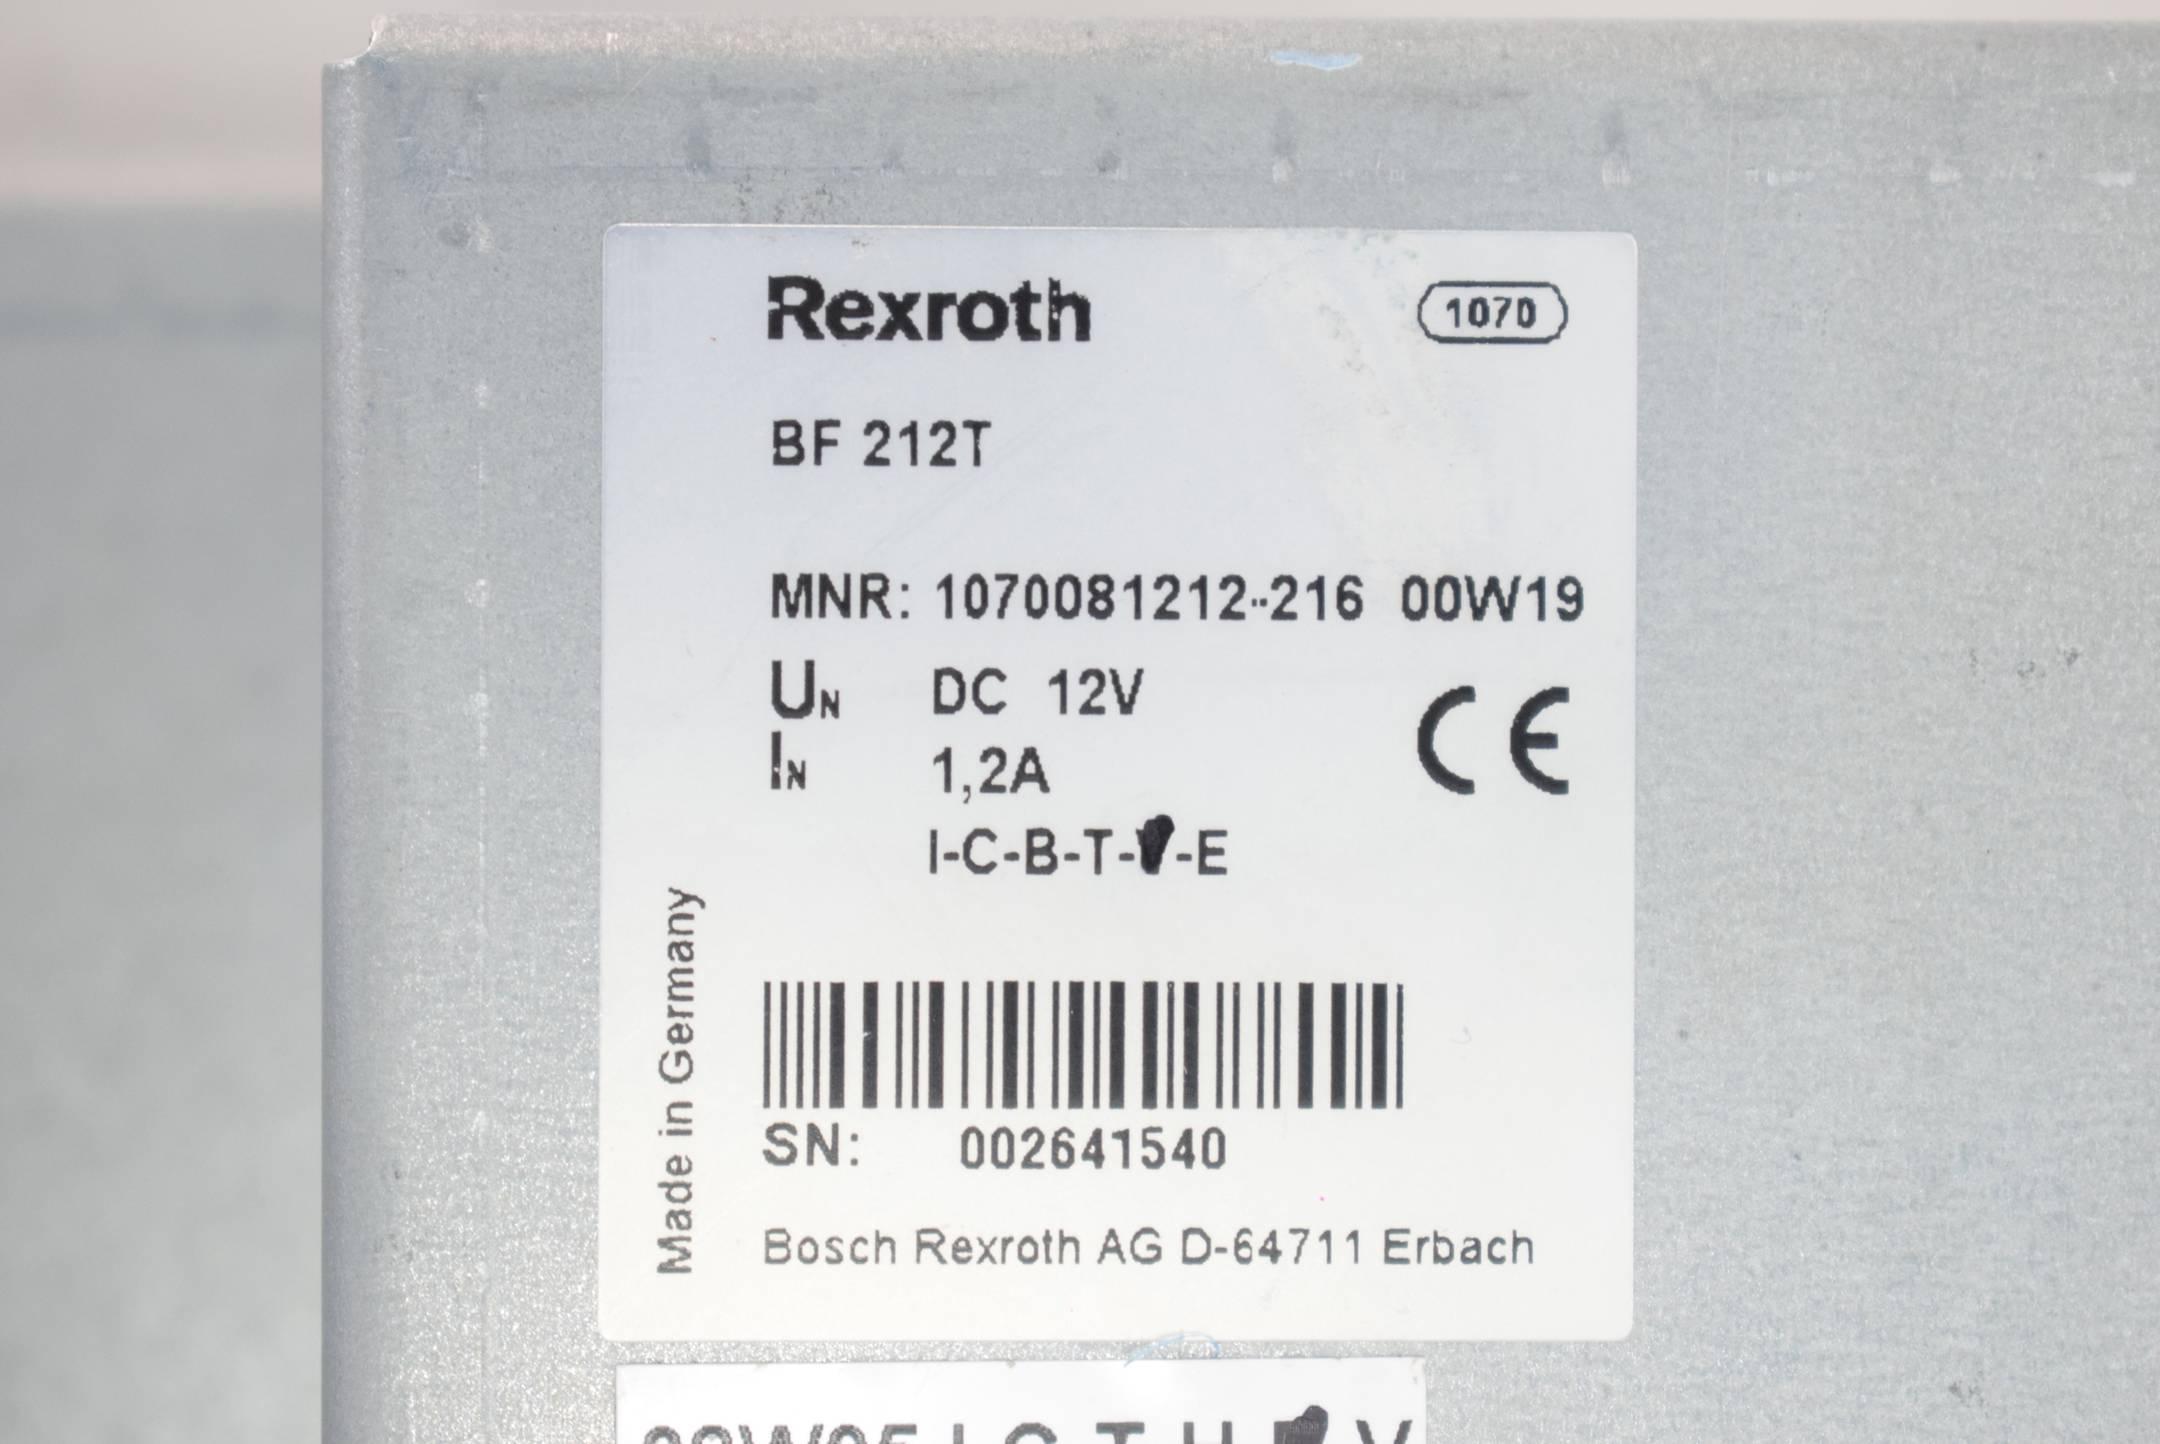 Bosch Indramat Rexroth HMI Touch Panel BF212T ( BF 212T ) 1070081212-216